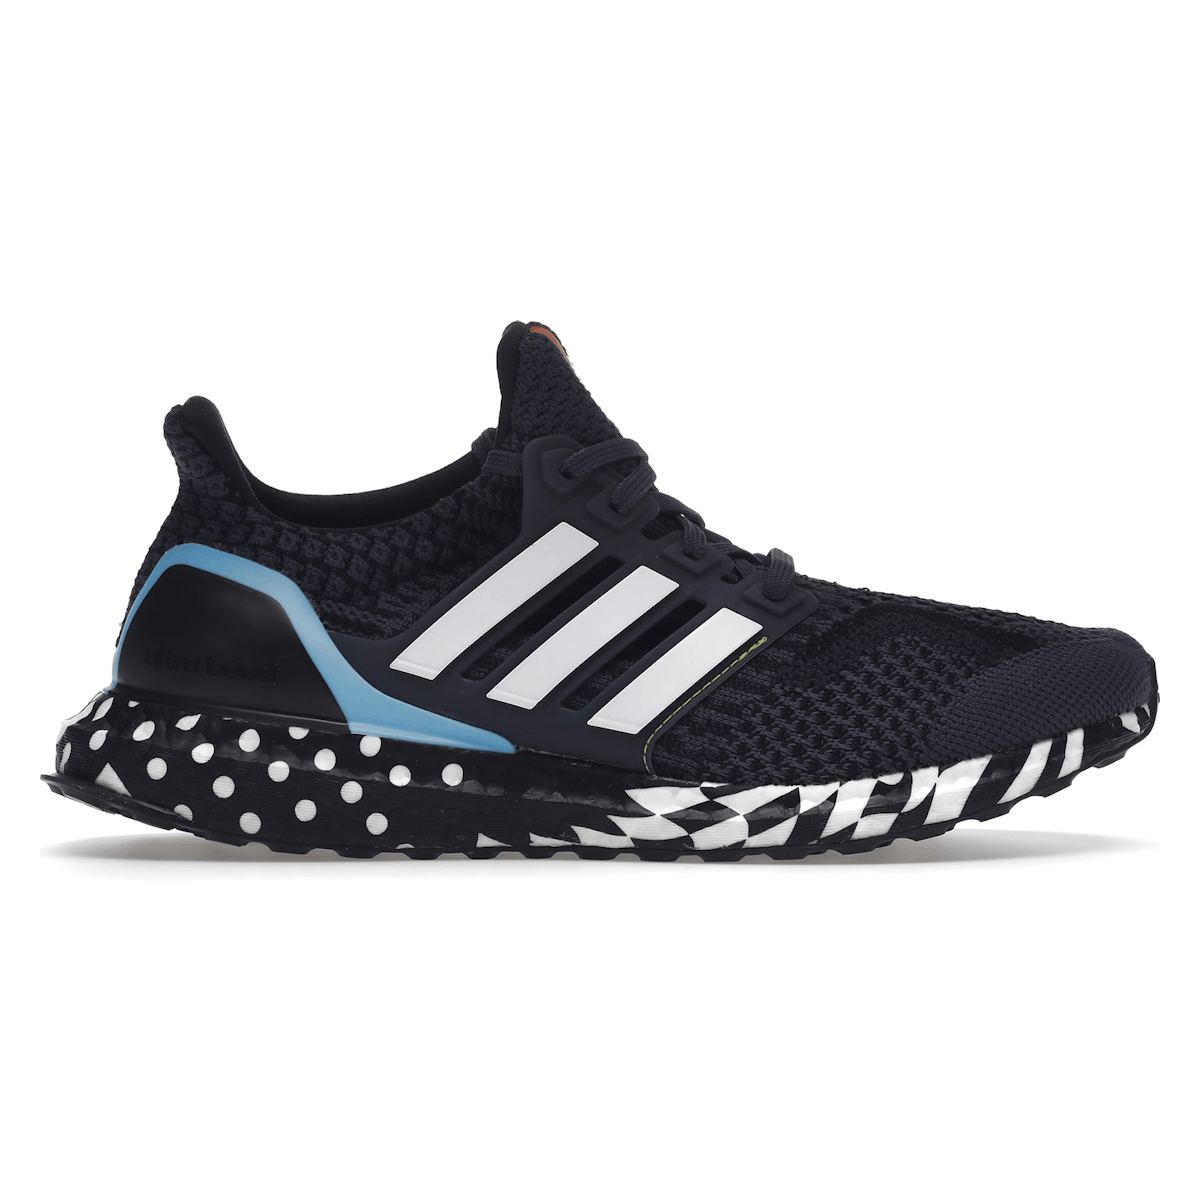 adidas Ultra Boost 5.0 DNA Navy Black White Patterned Midsole